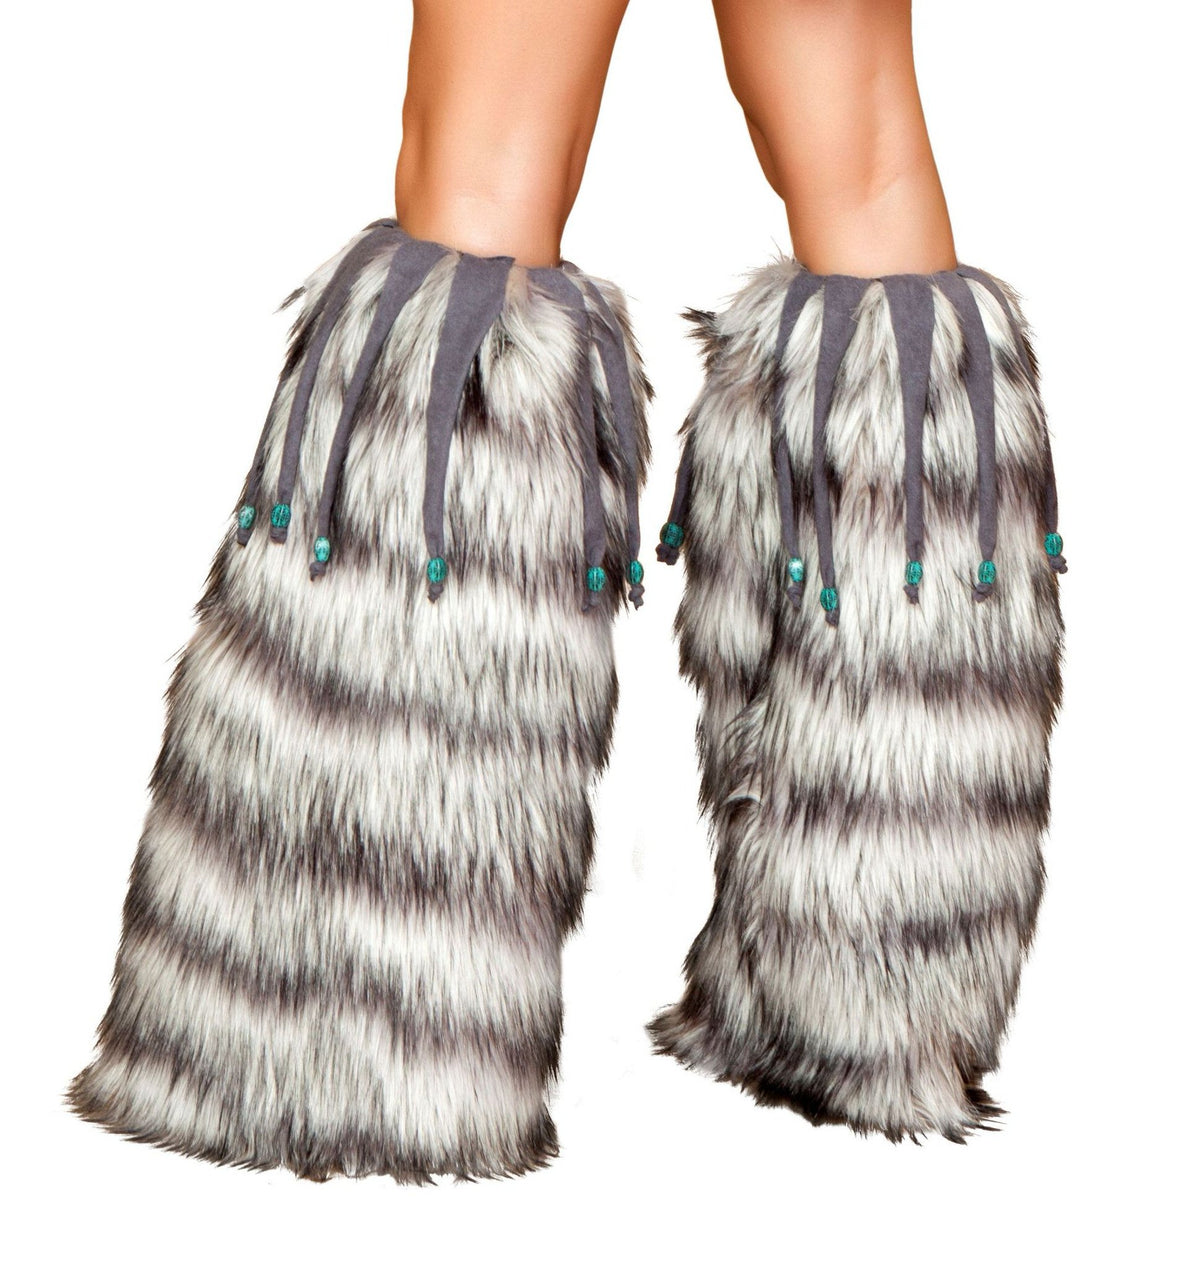 Pair of Fur Leg Warmers with Fringe and Bead Details